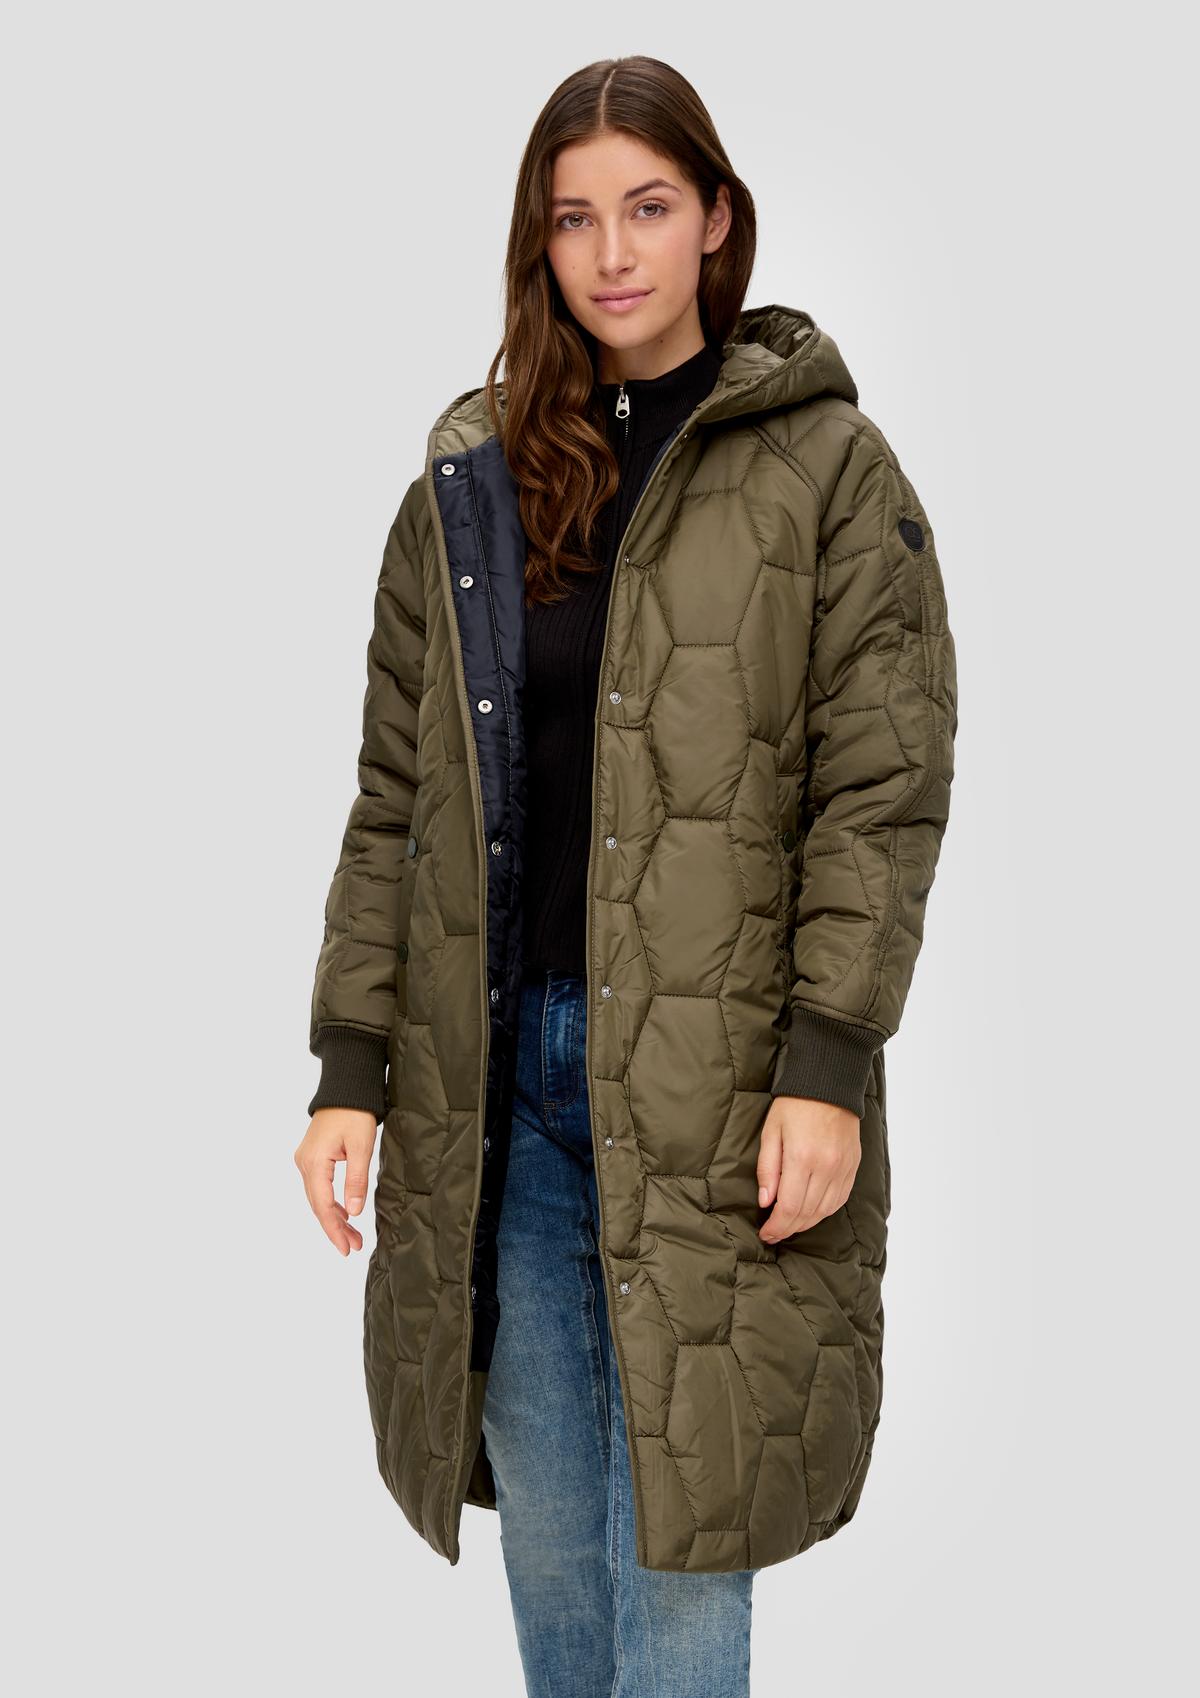 Quilted coat in of - a materials mix olive